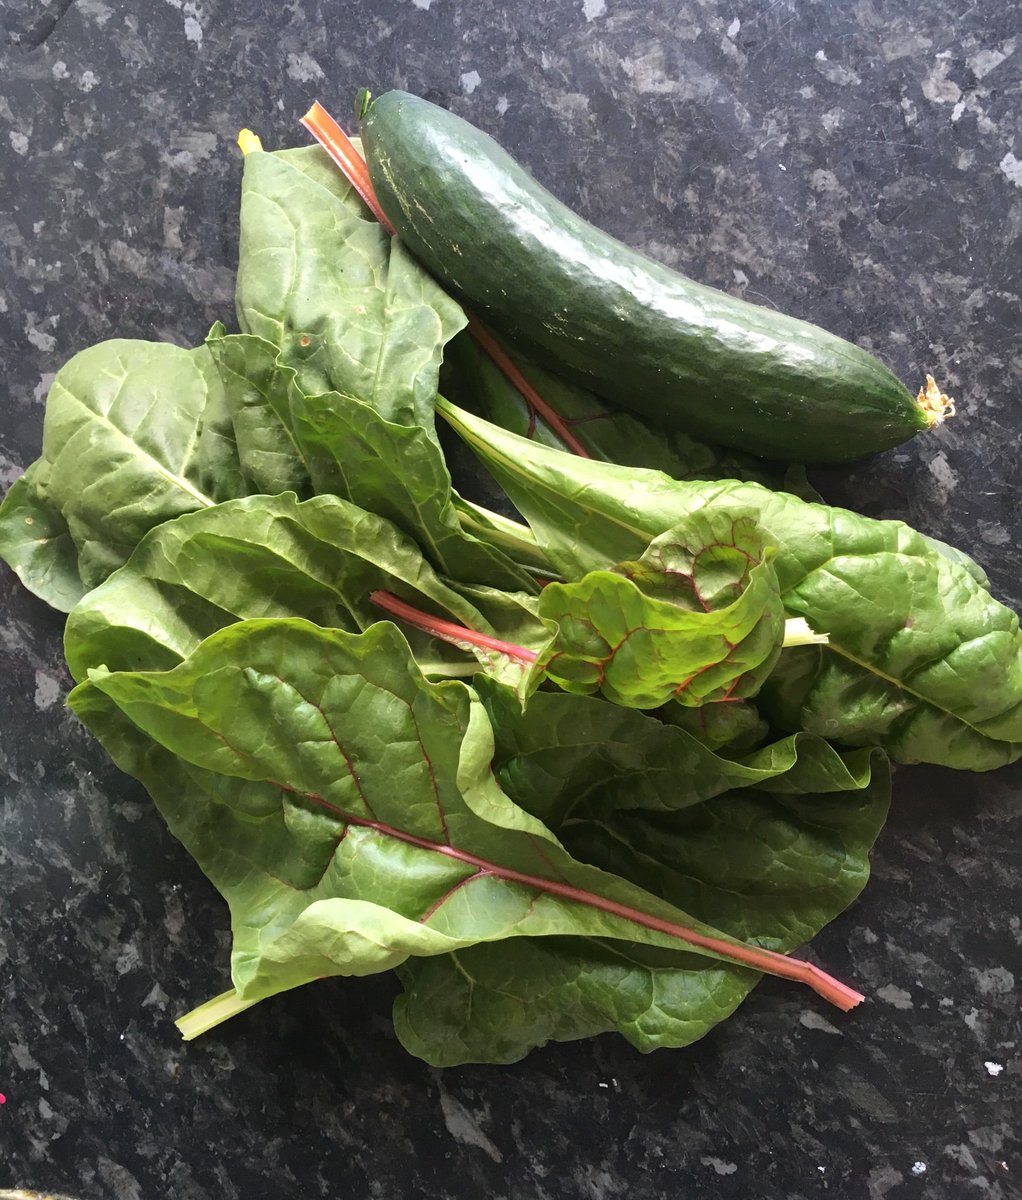 First haul from the garden! Probably still a bit early for the chard but wanted to try some before the caterpillars eat it all! 

#microhomestead #vegetablegarden #veggieplot #veggiepatch #palletgarden #rainbowchard #fresh #homeschool #homeed @autisticgardner